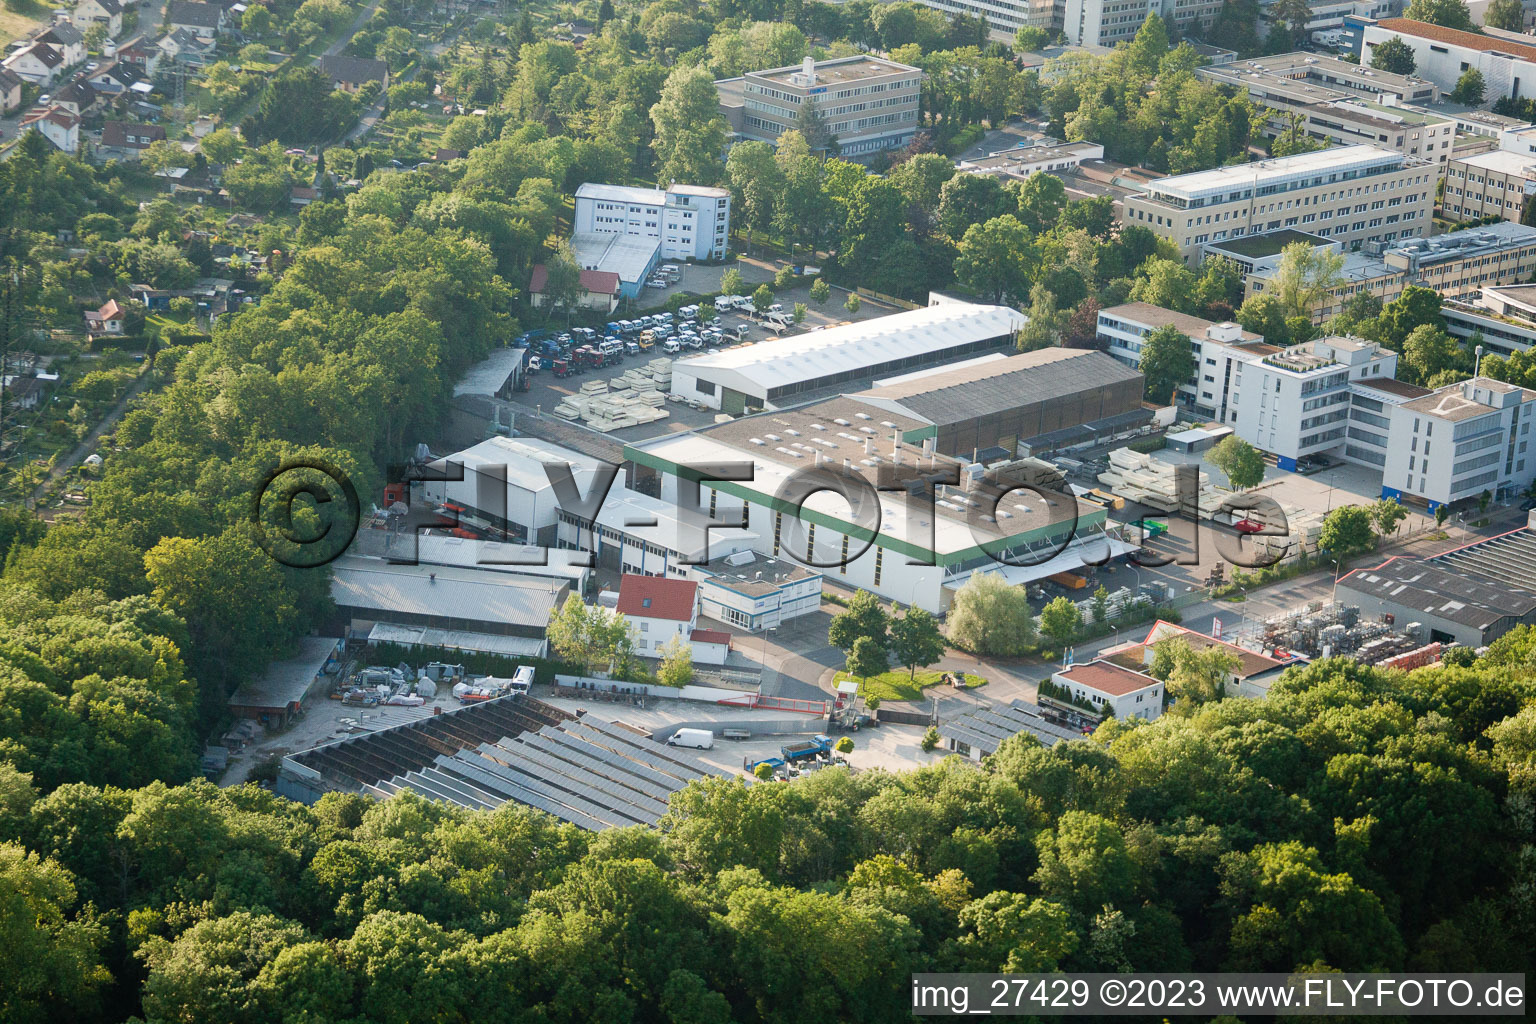 Aerial view of Killisfeld industrial area in the district Durlach in Karlsruhe in the state Baden-Wuerttemberg, Germany